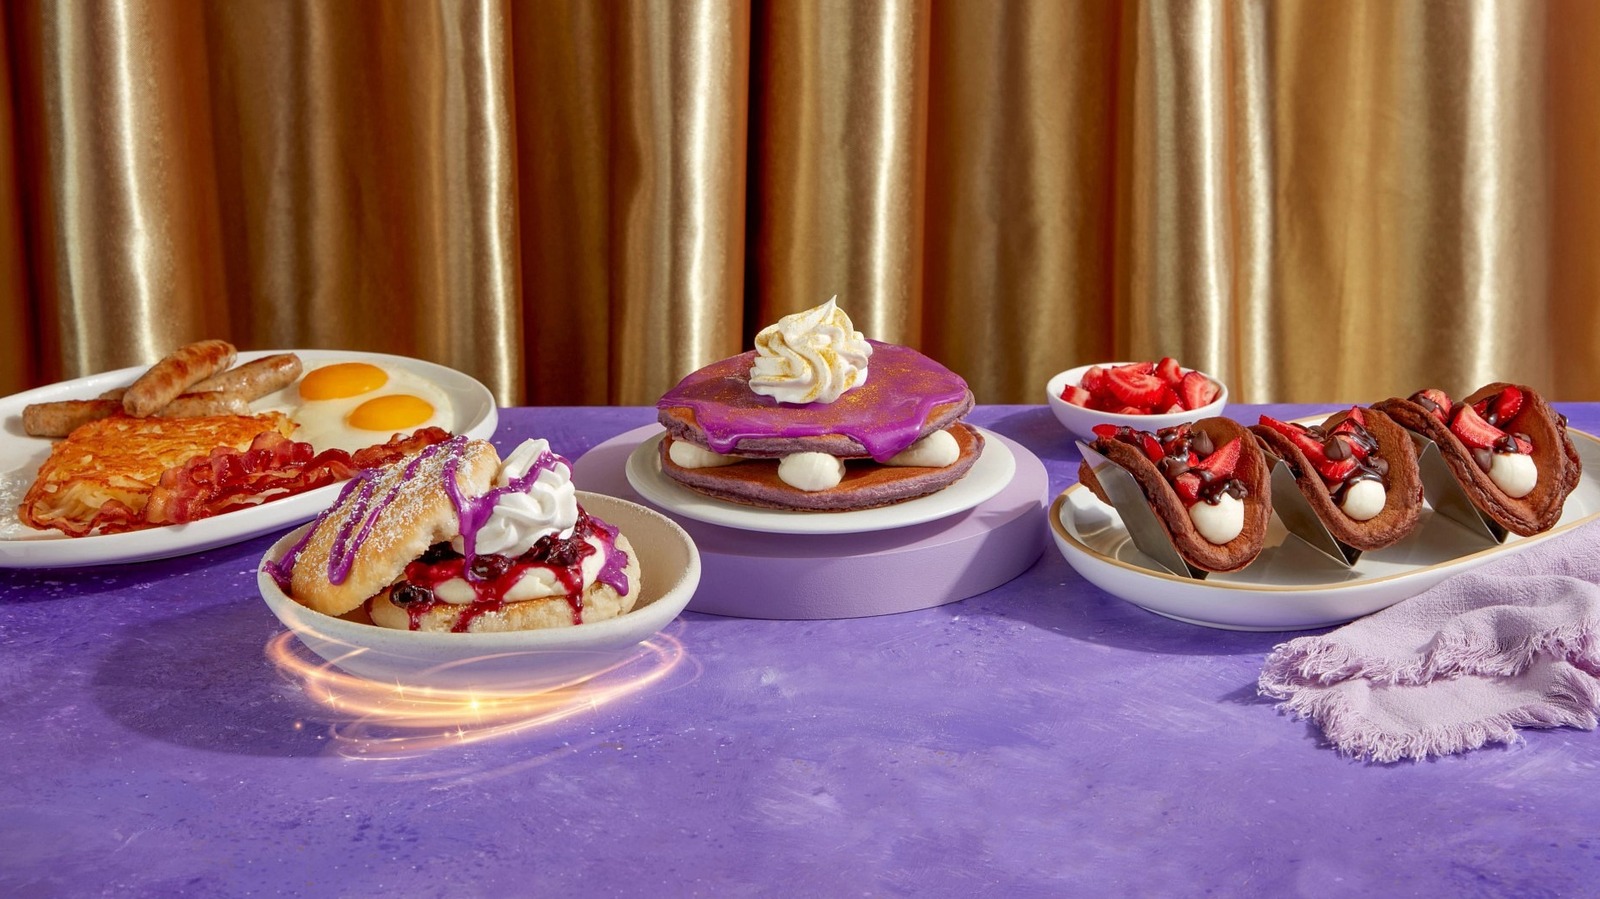 IHOP Is Bringing Fanciful WonkaInspired Dishes To Its Menu